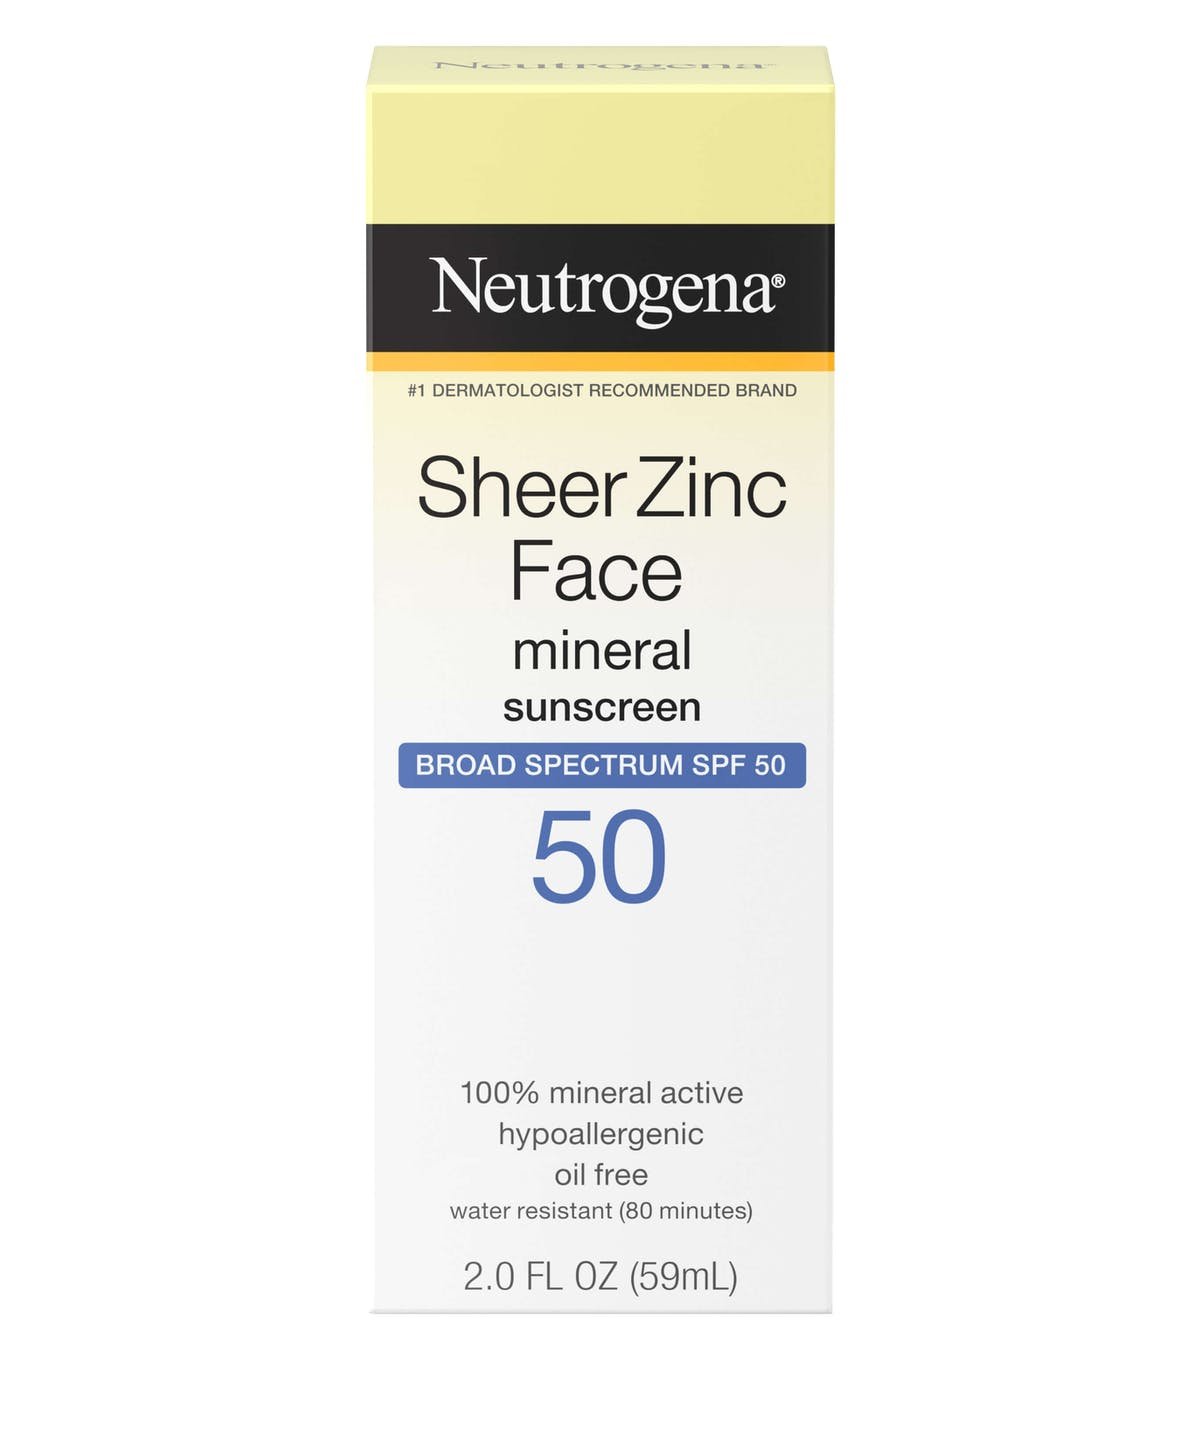 Neutrogena Sheer Zinc Dry-Touch Face Sunscreen With SPF 50, 2 Fl. Oz, 6-Pack - image 1 of 7